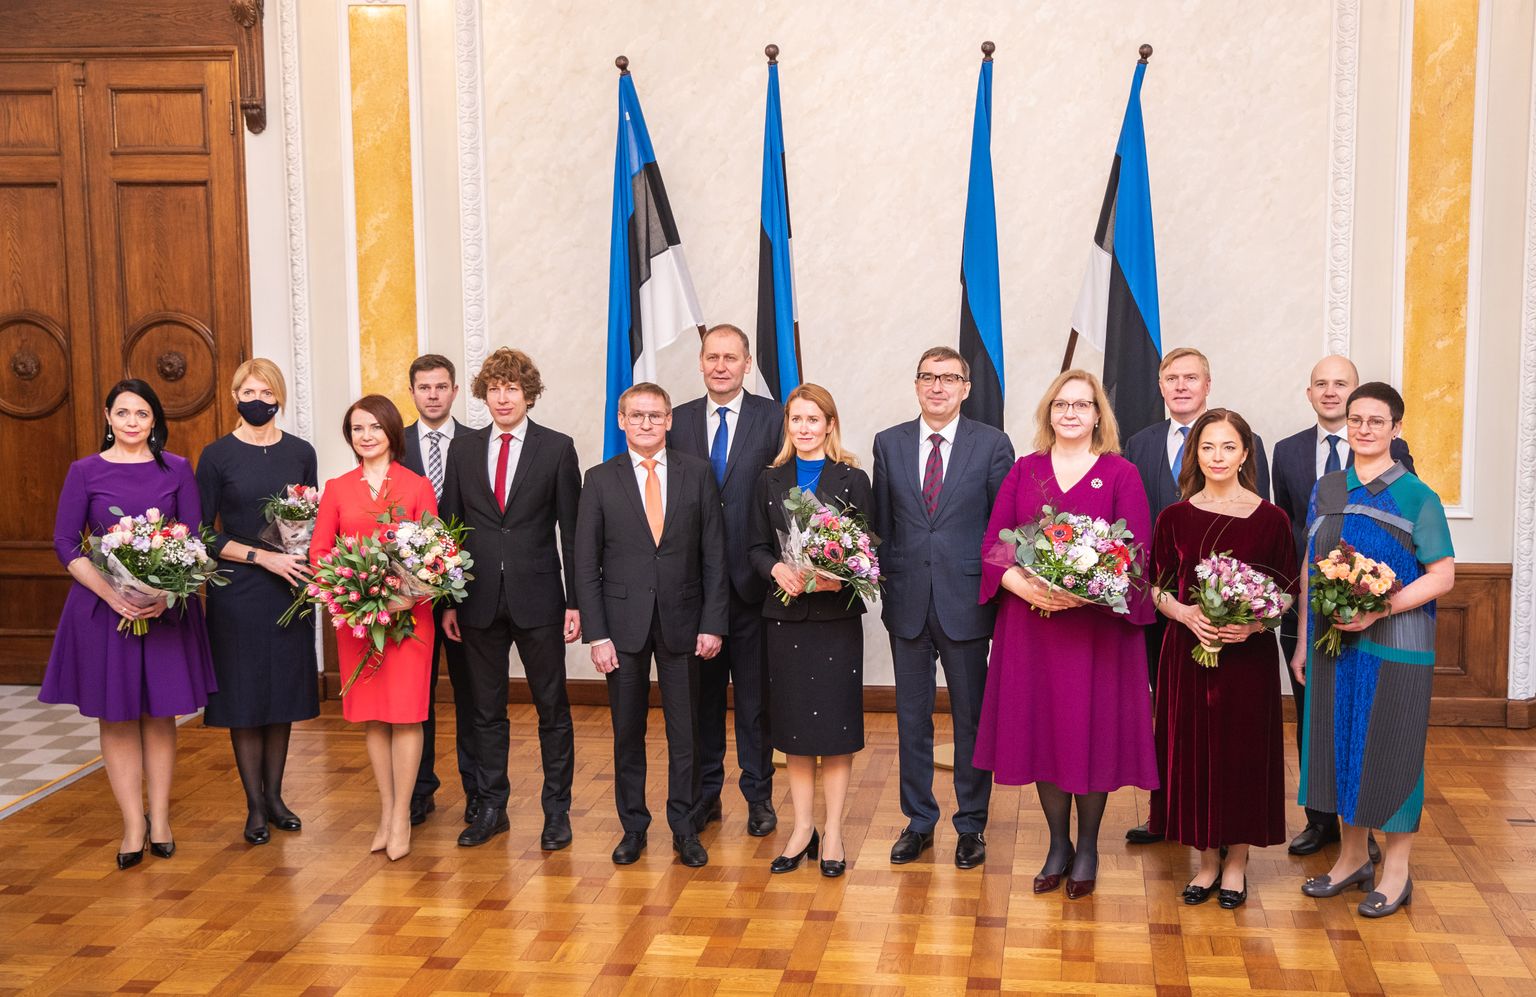 The ministers of the government of Kaja Kallas.